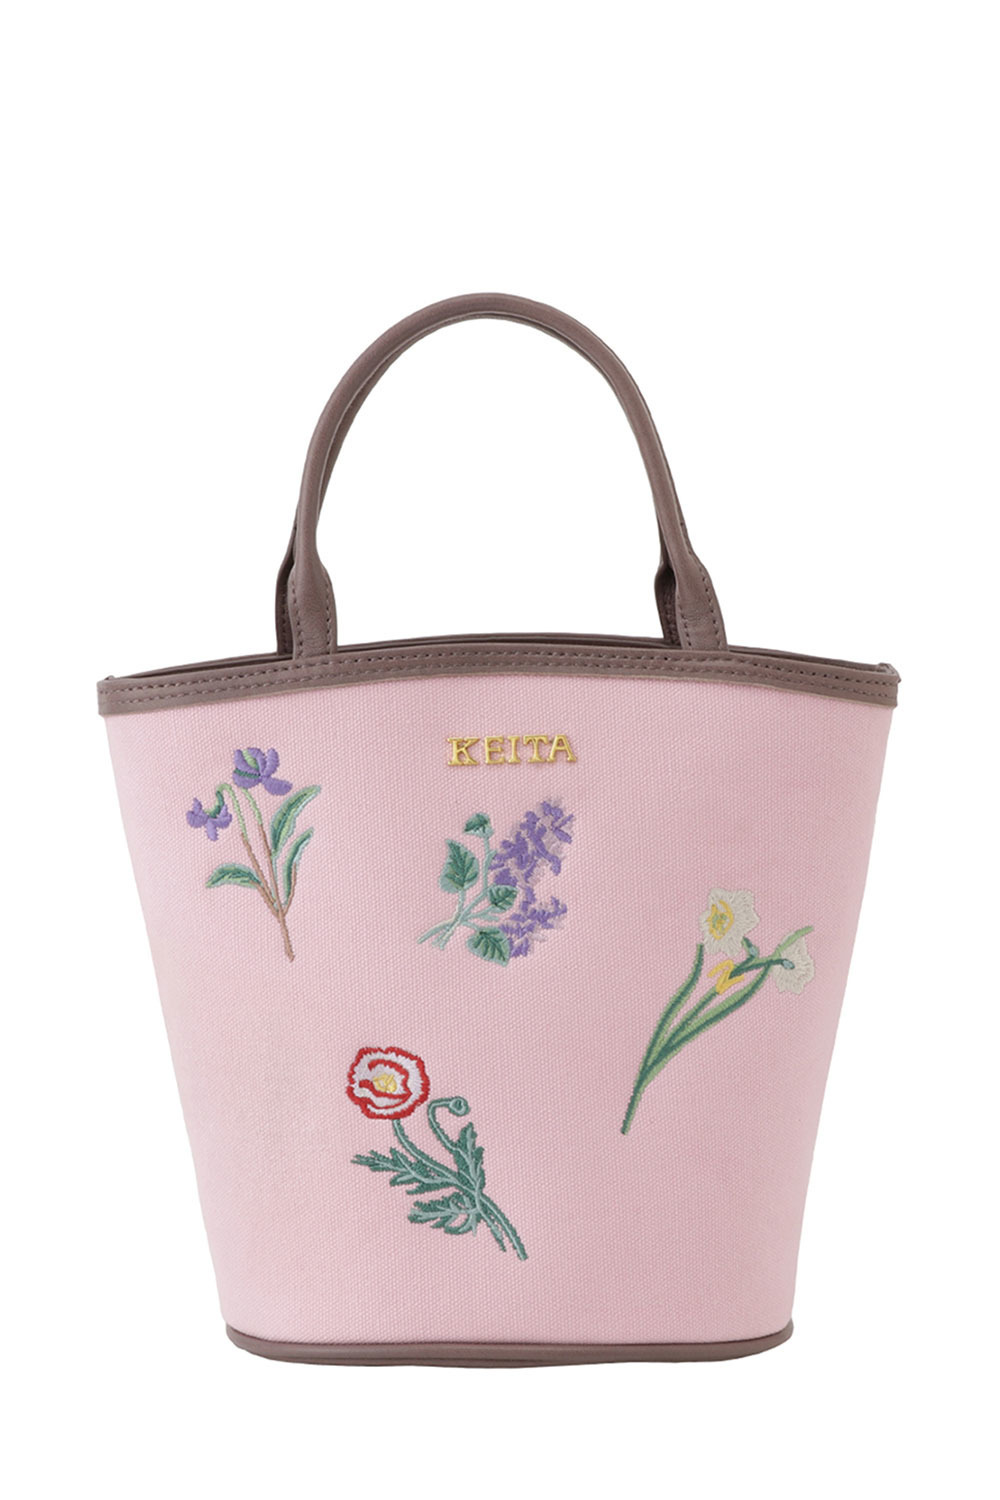 Bucket Bag spring flower embroidery 詳細画像 ピンク